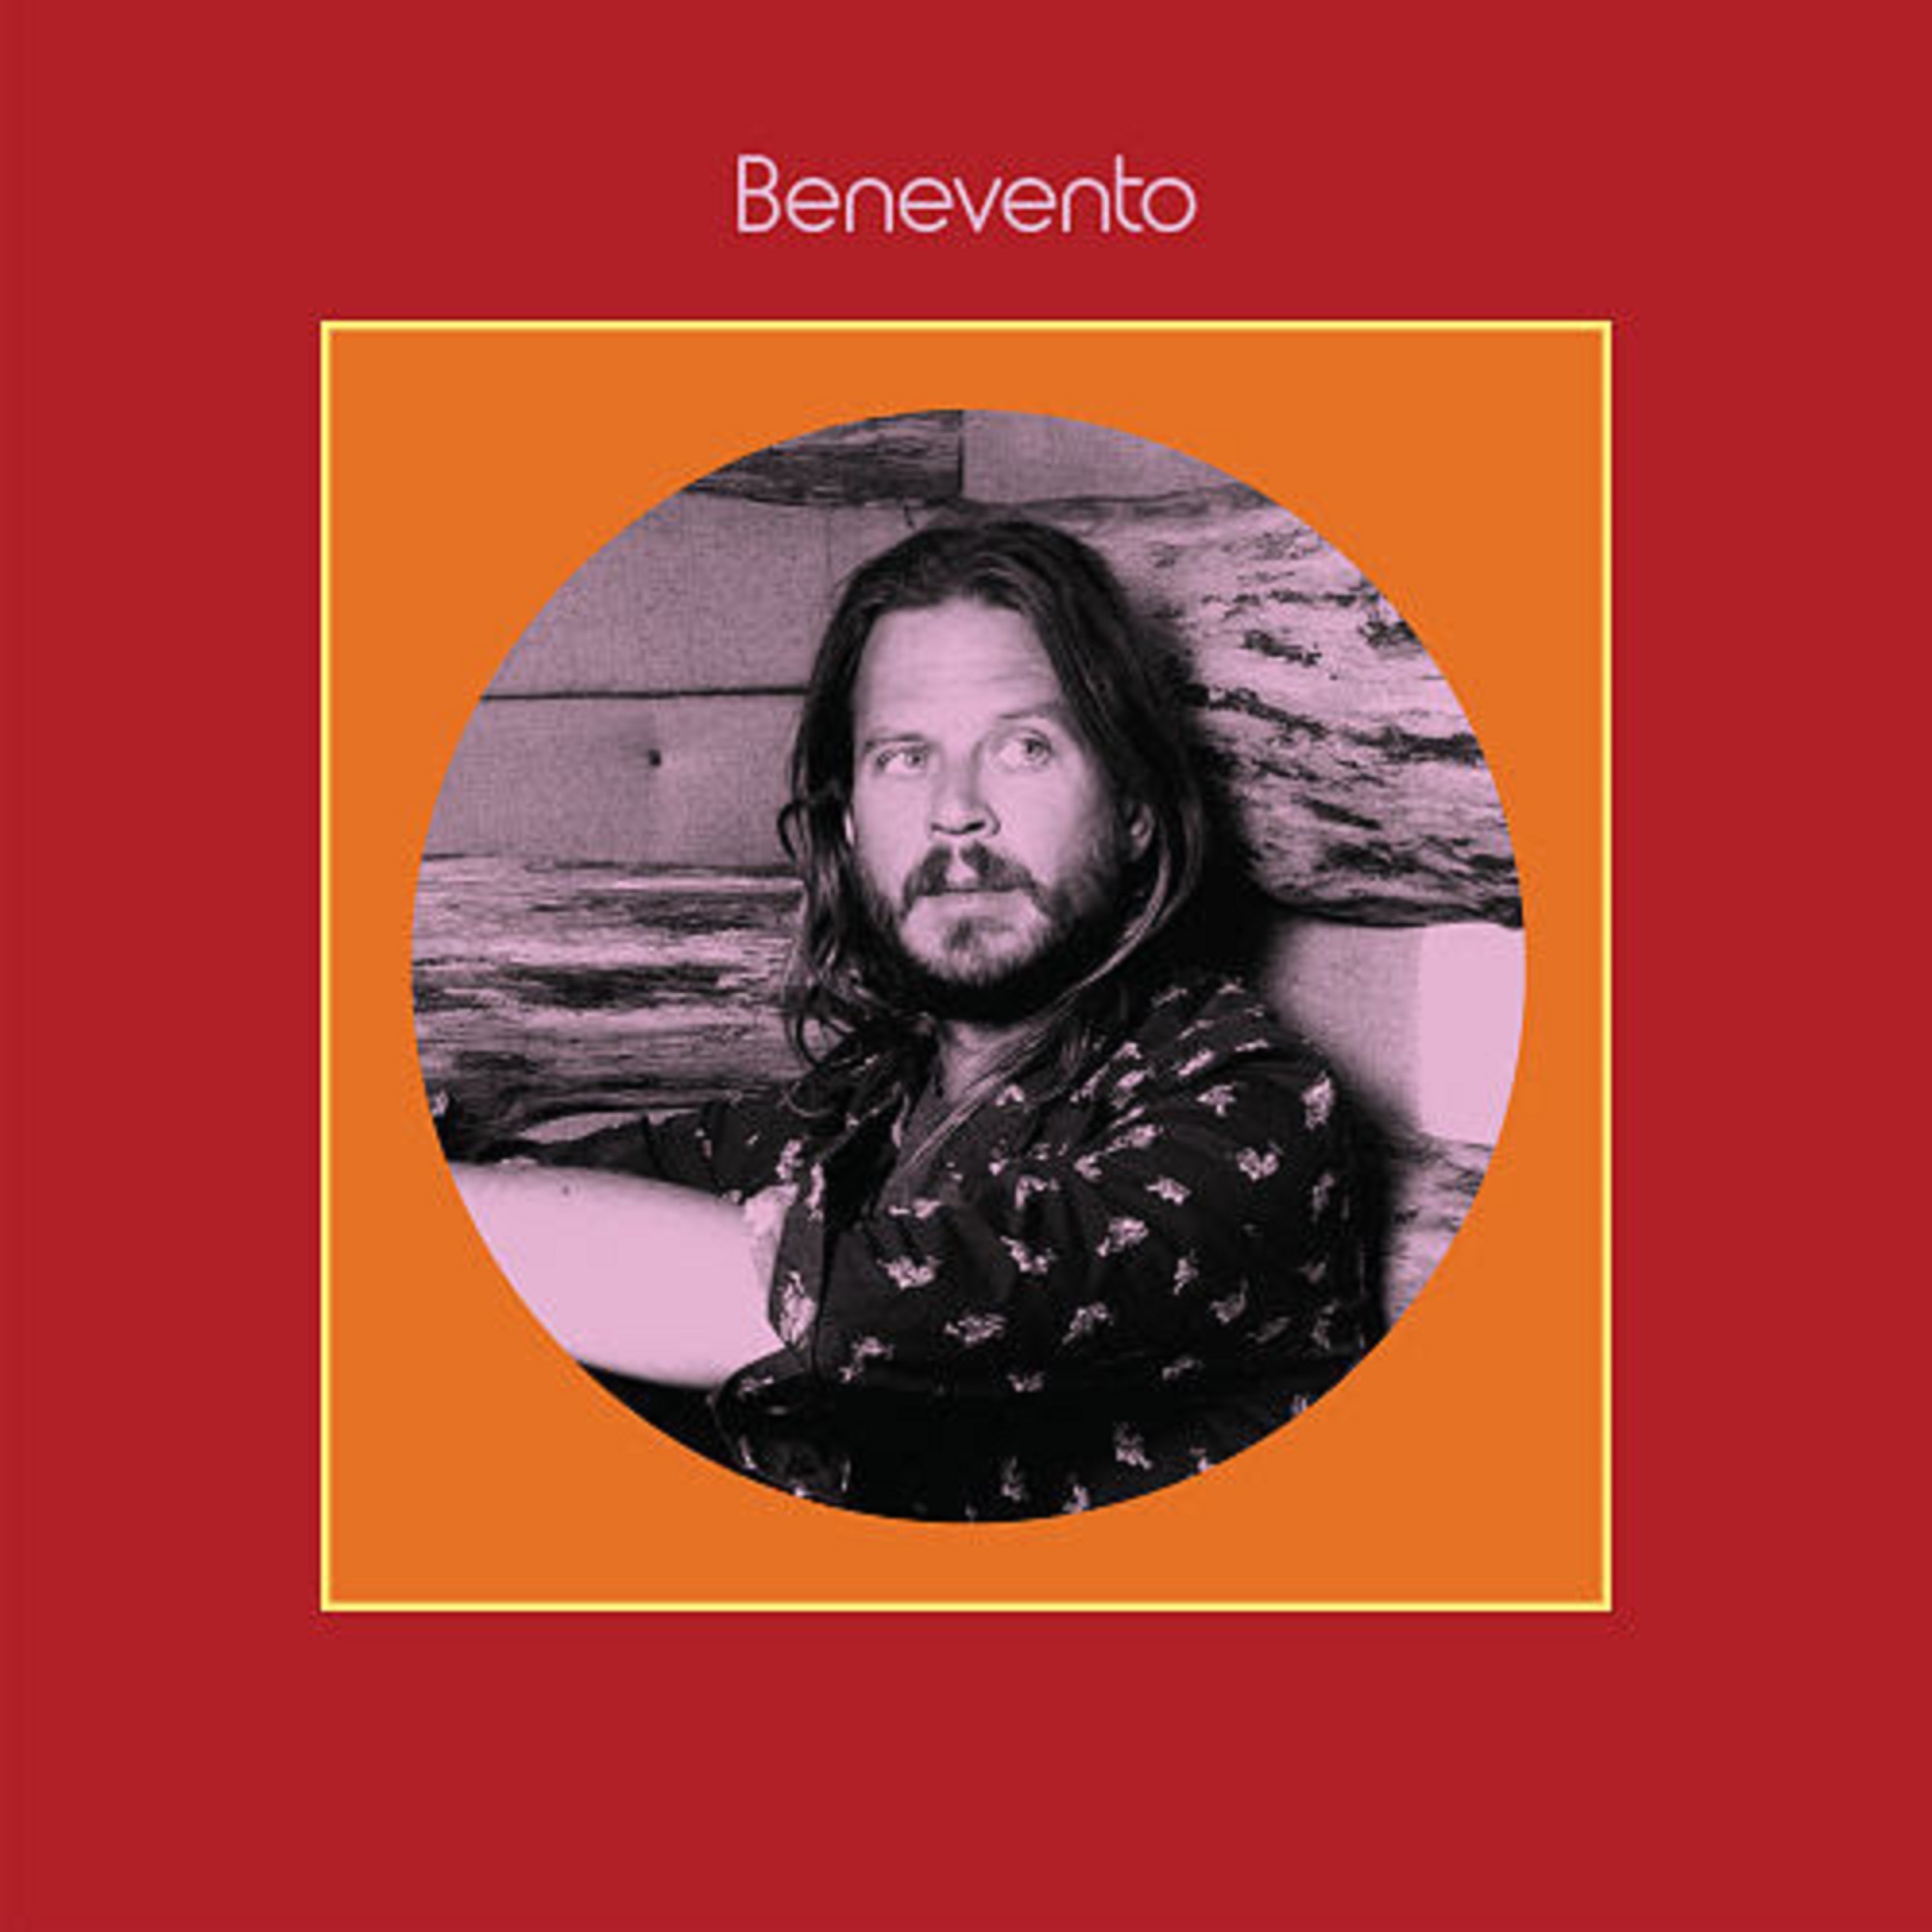 Marco Benevento New LP 'Benevento' Out Today